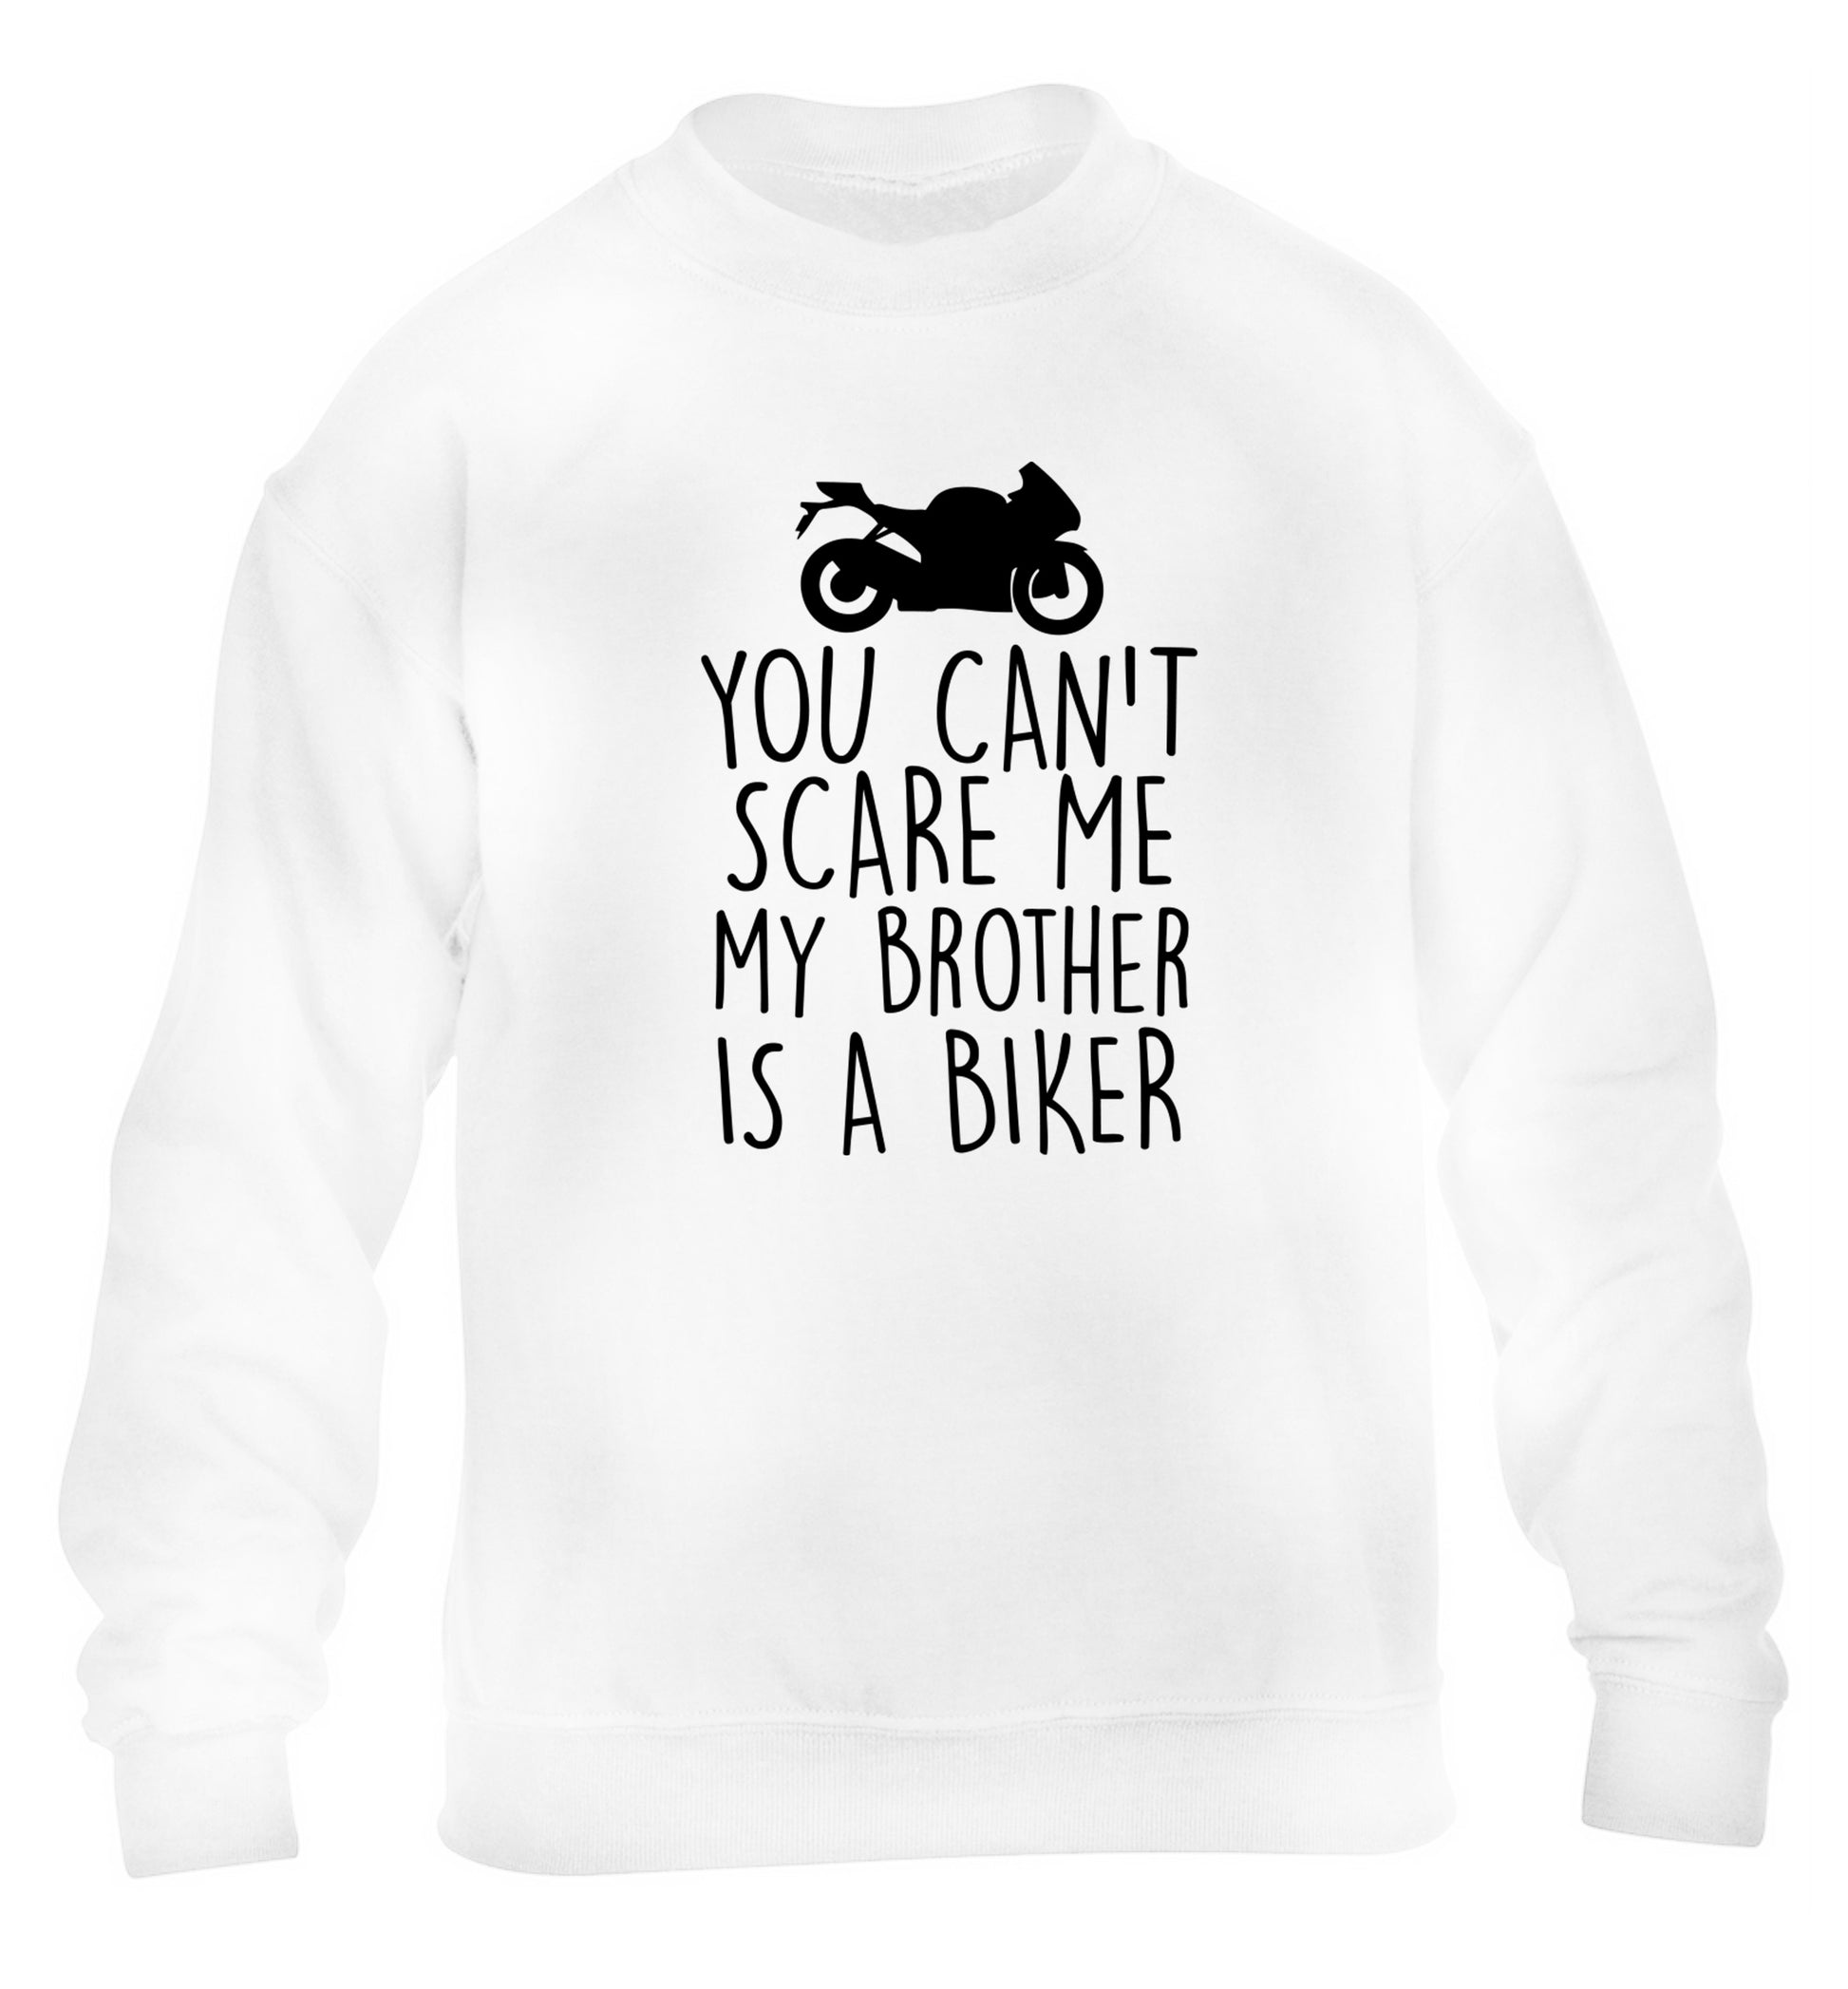 You can't scare me my brother is a biker children's white sweater 12-13 Years